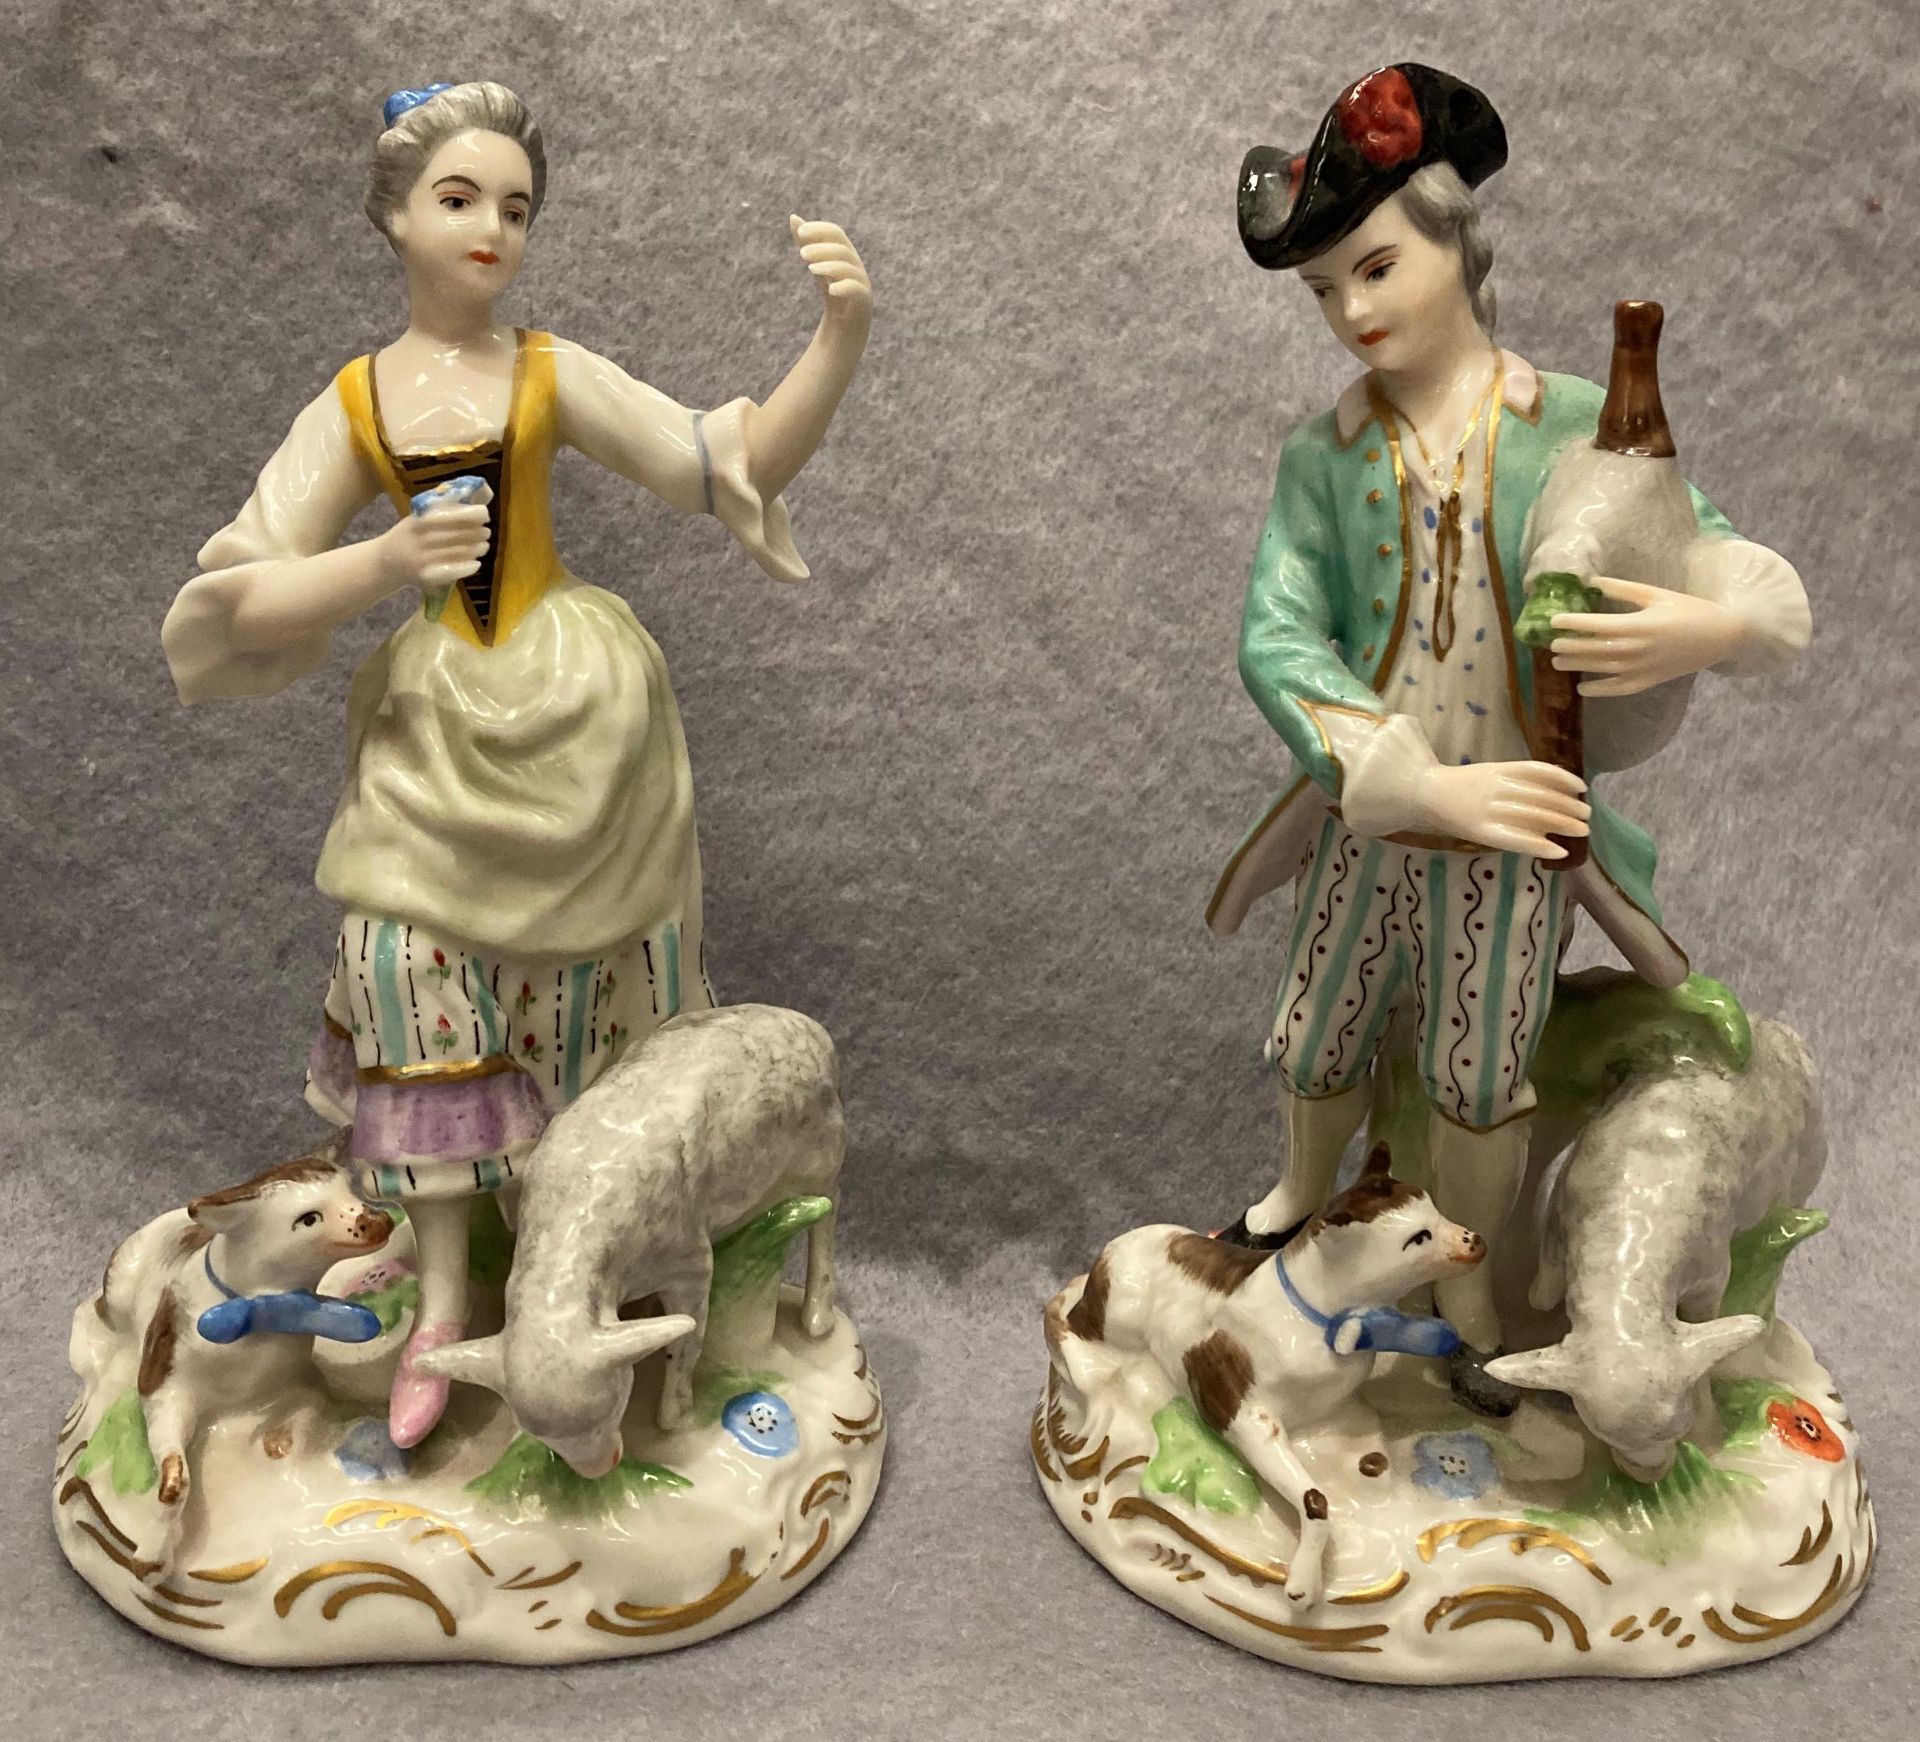 Pair of porcelain figurines, man and woman with animals, damage to the man's animal with bow,